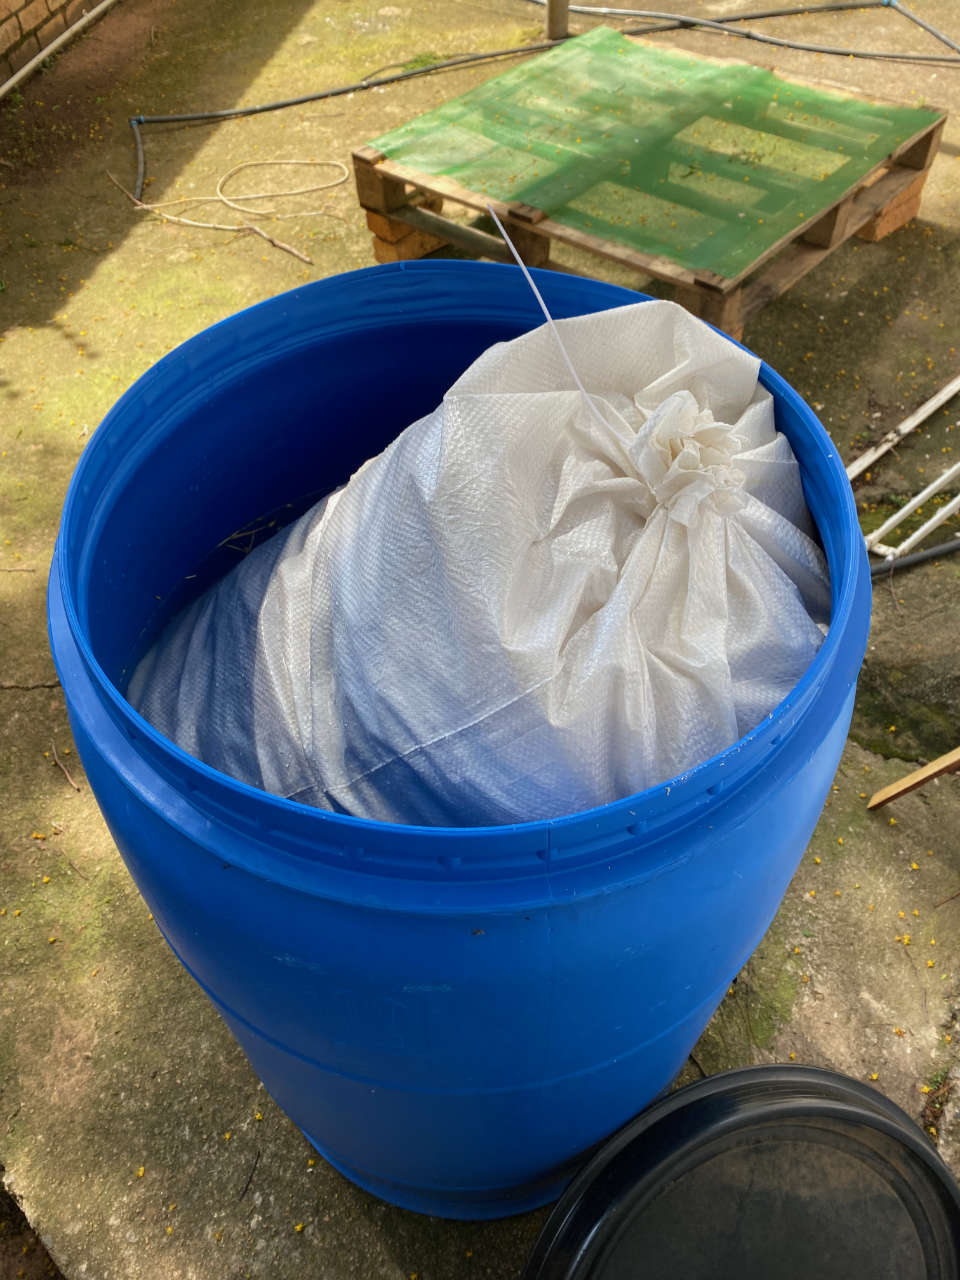 A bag with straw substrate ready to be given a lime bath in a blue 55 gallon drum